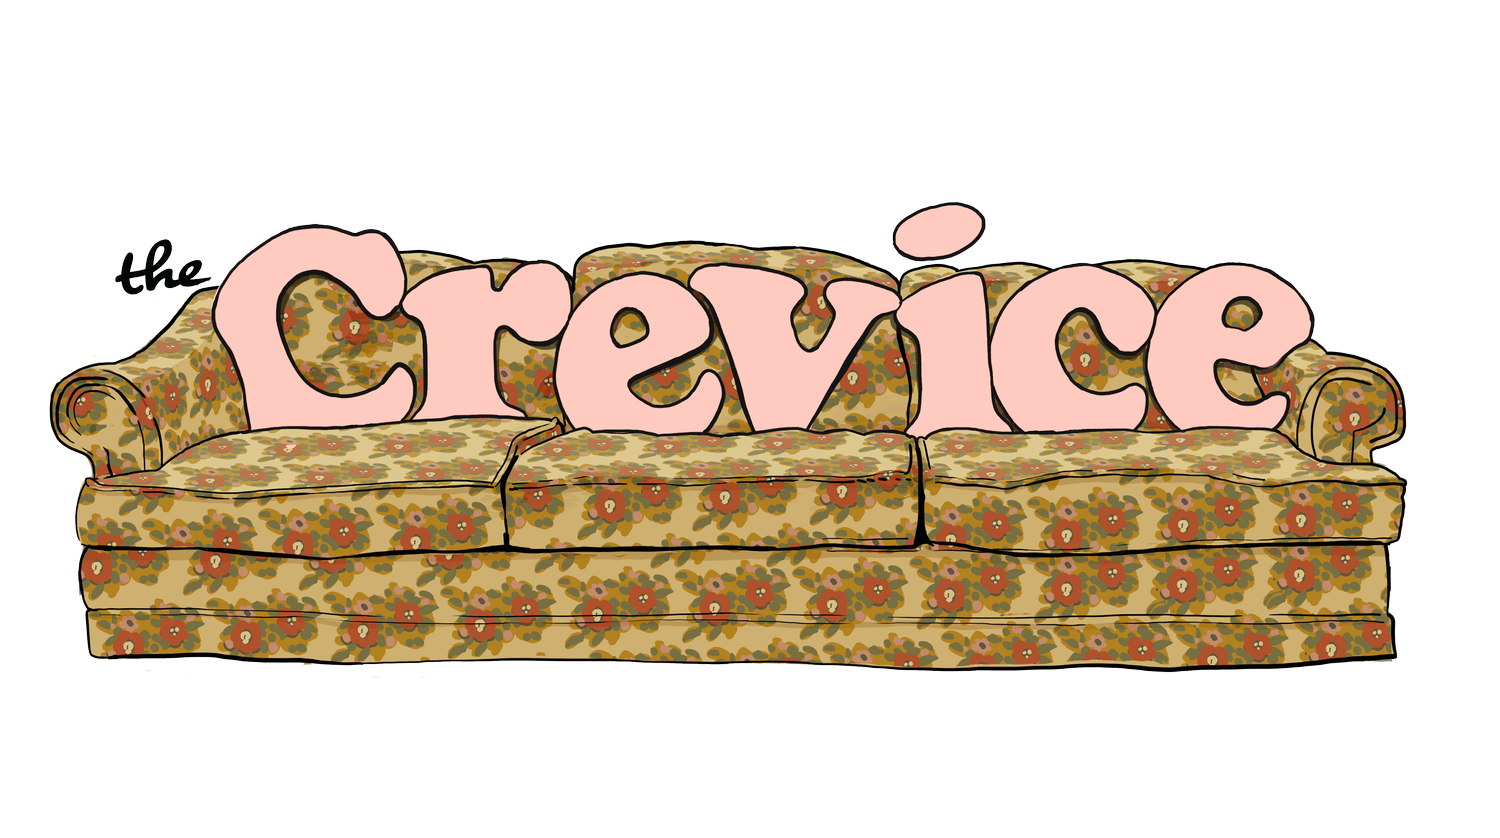 The Crevice